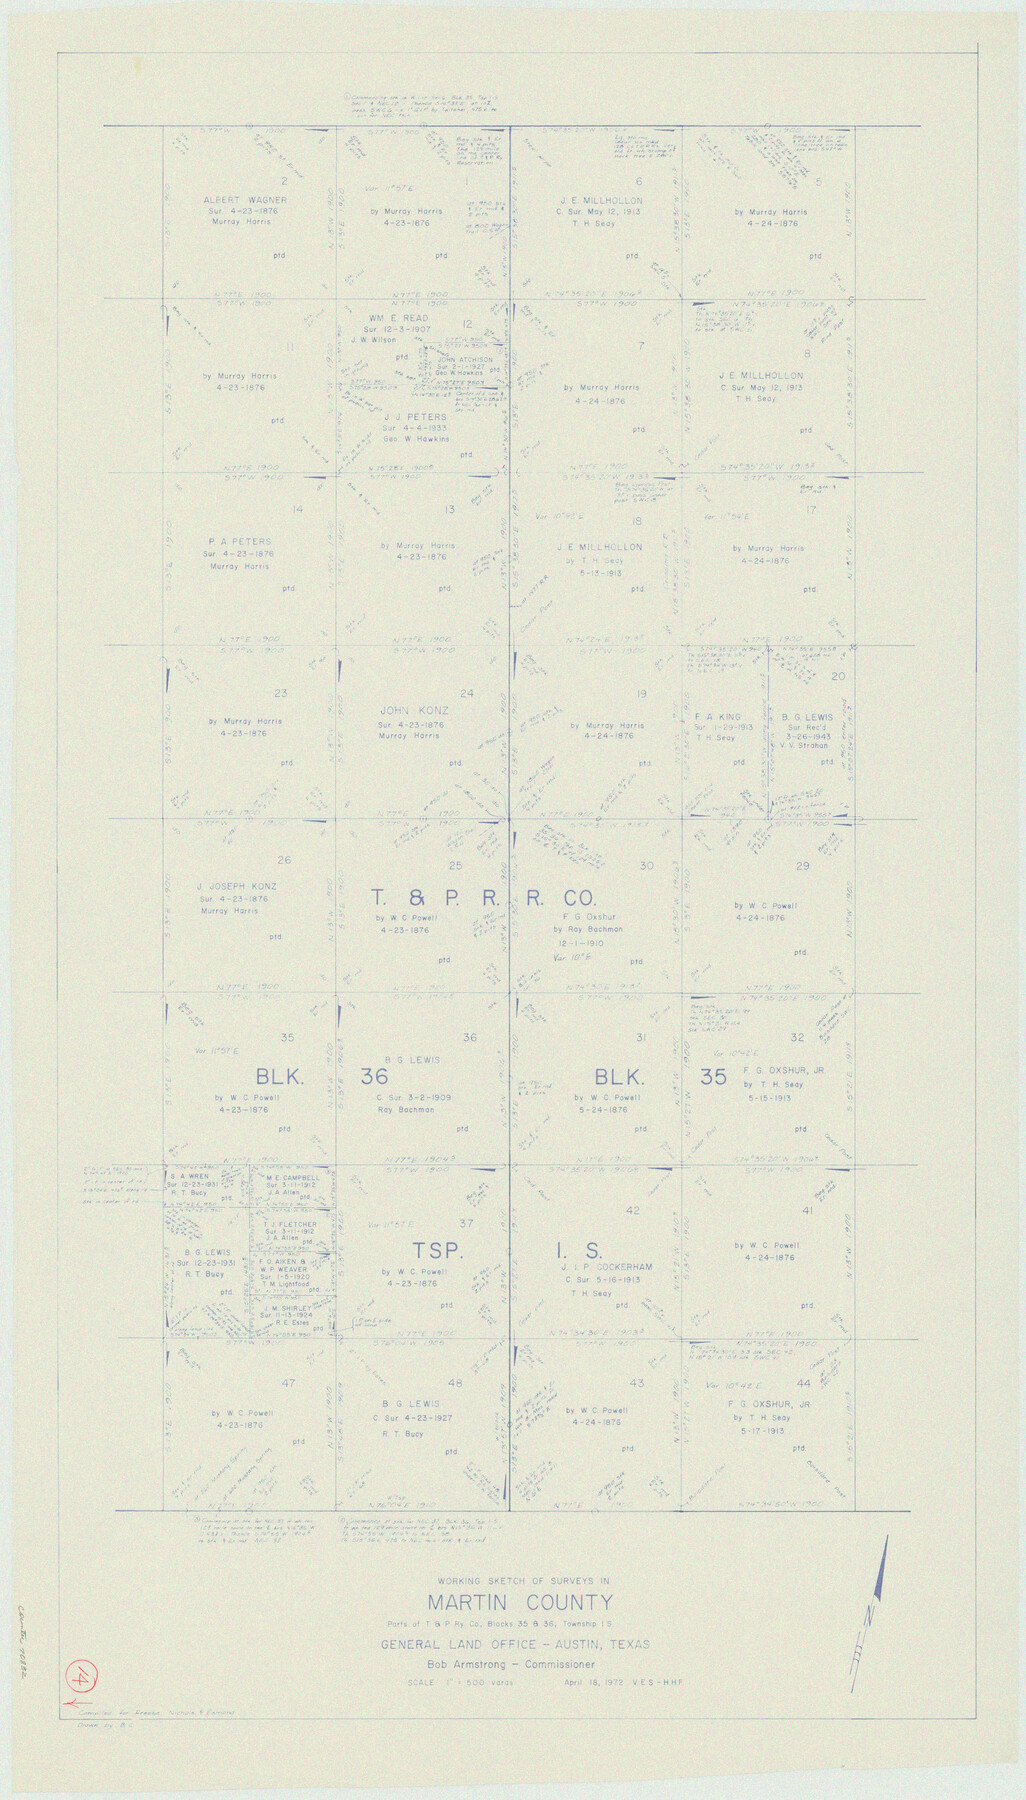 70832, Martin County Working Sketch 14, General Map Collection